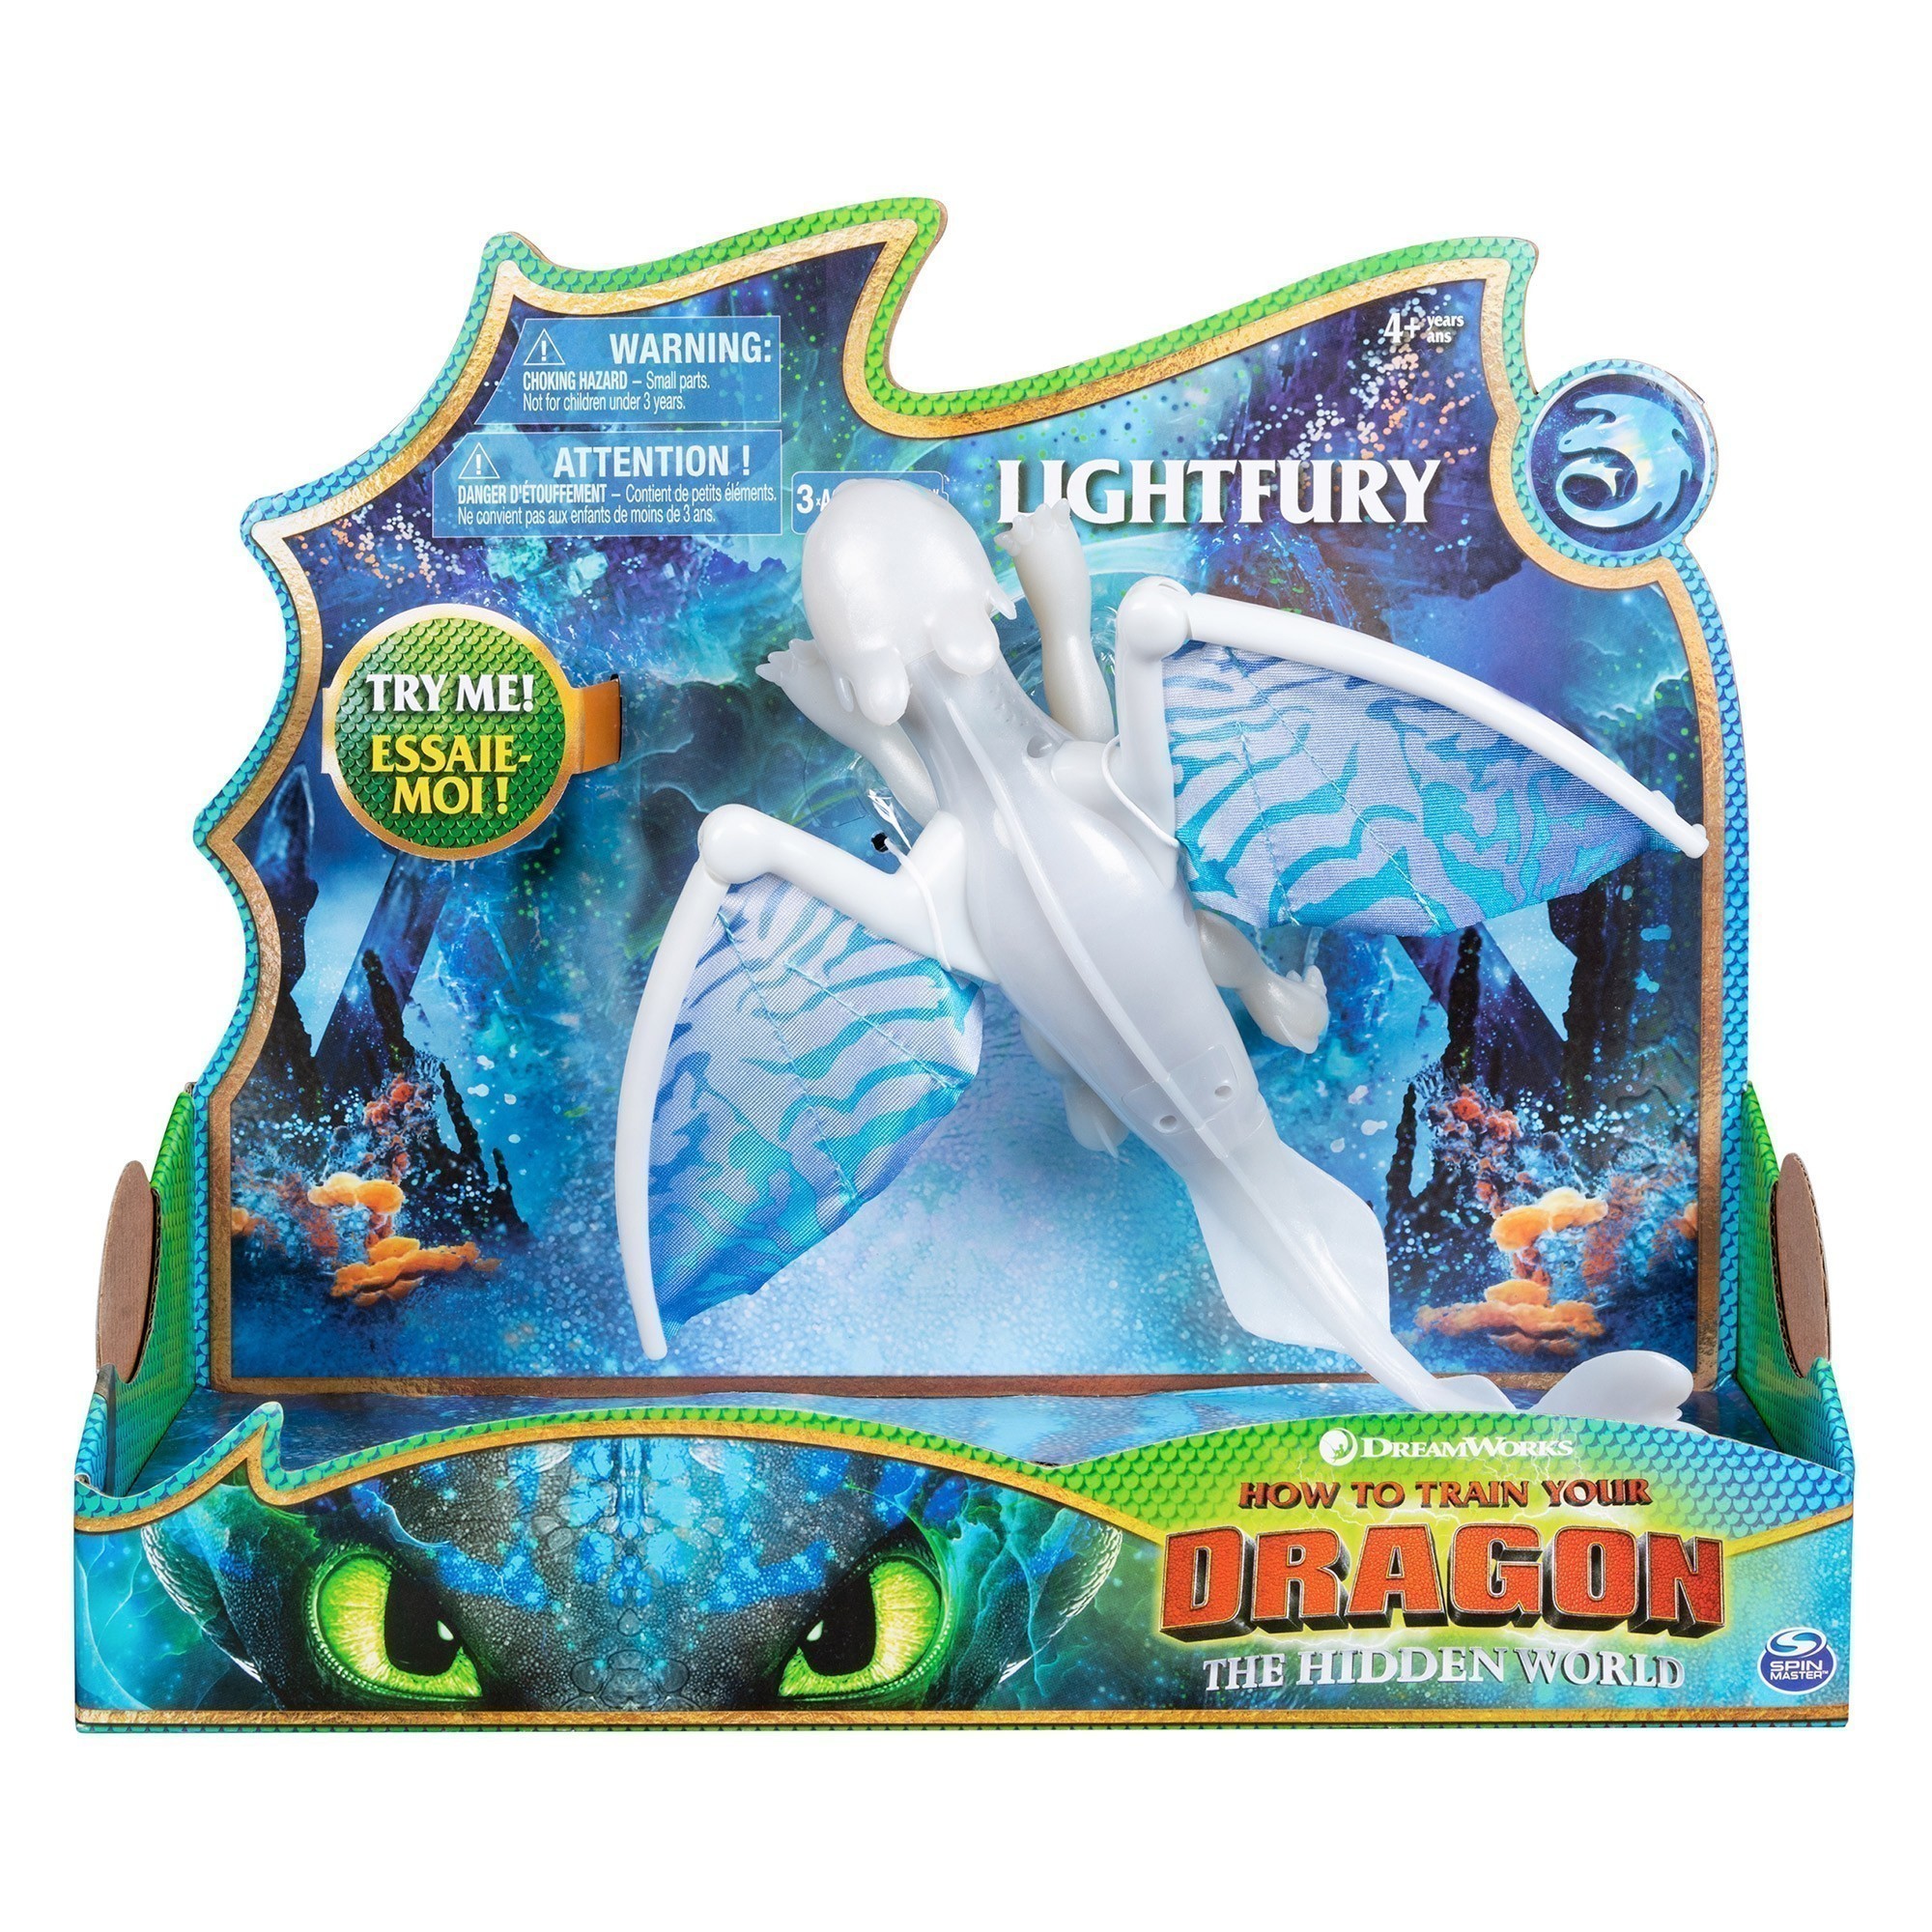 Dreamworks - How To Train Your Dragon 3 - Deluxe Lightfury Dragon